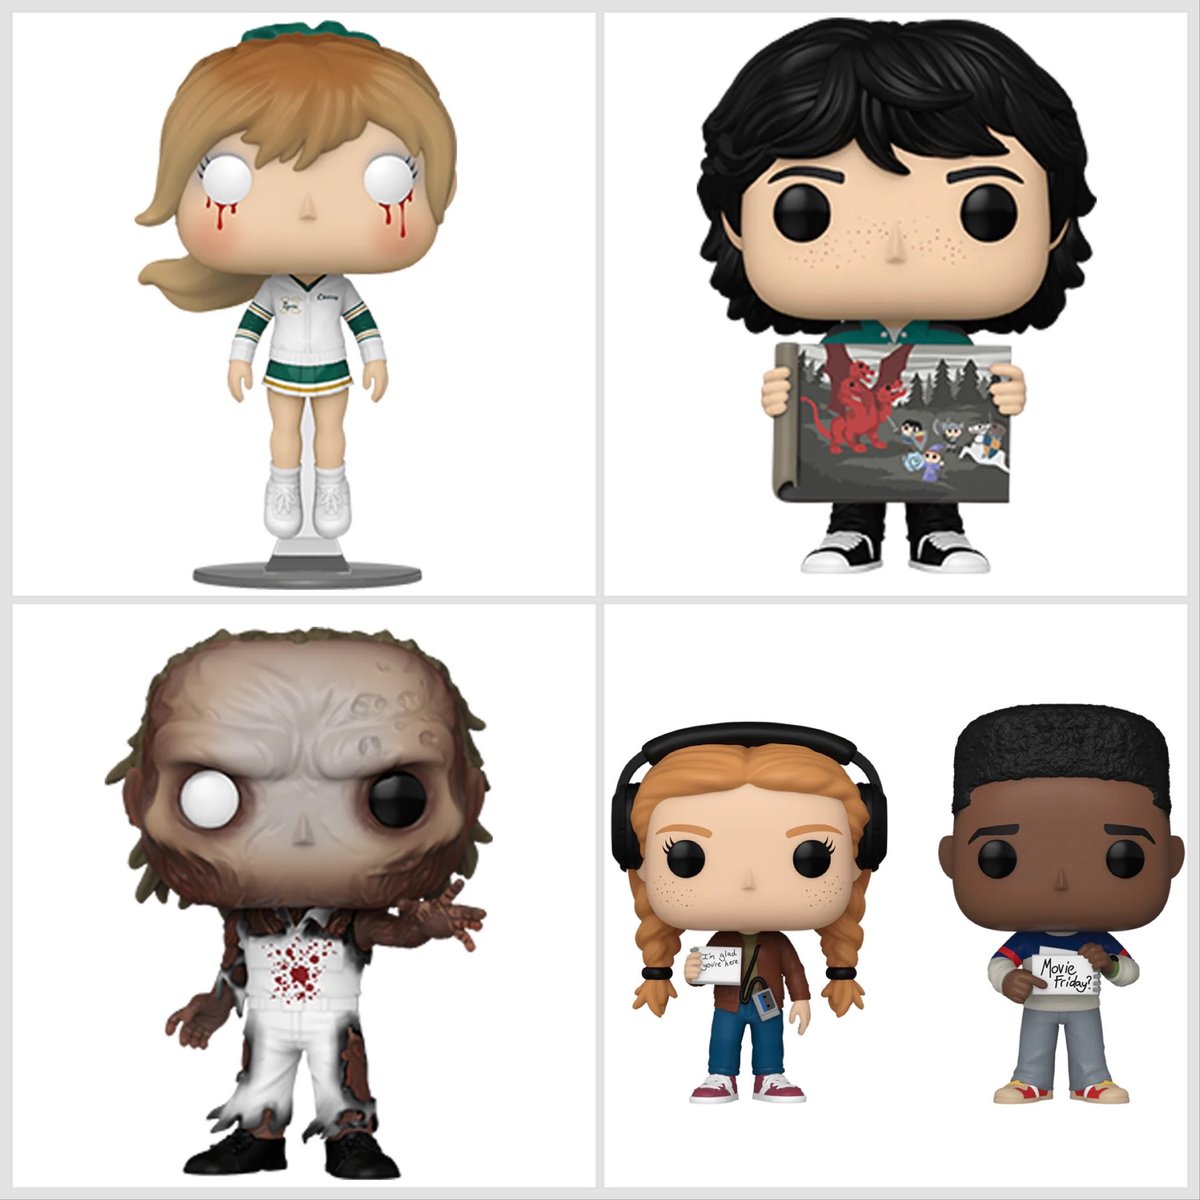 Glam shot look at the new Stranger Things Pops!
.
#StrangerThings #Netflix #Funko #FunkoPop #FunkoPopVinyl #Pop #PopVinyl #Collectibles #Collectible #FunkoCollector #FunkoPops #Collector #Toy #Toys #DisTrackers